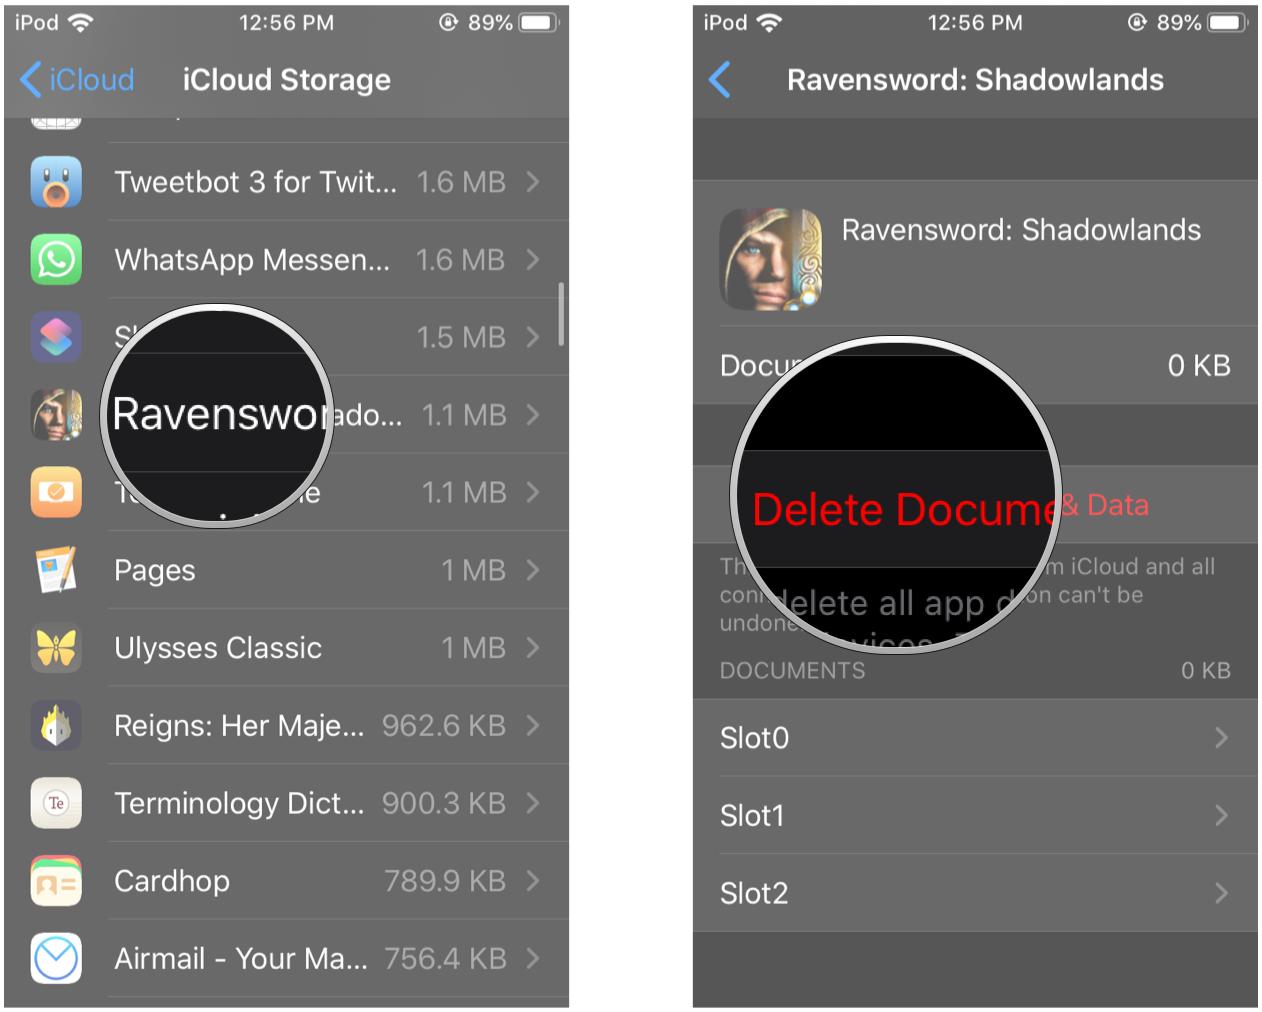 Manage your iCloud game saves by showing steps: Tap on the game you want to delete data for, then tap Delete Data